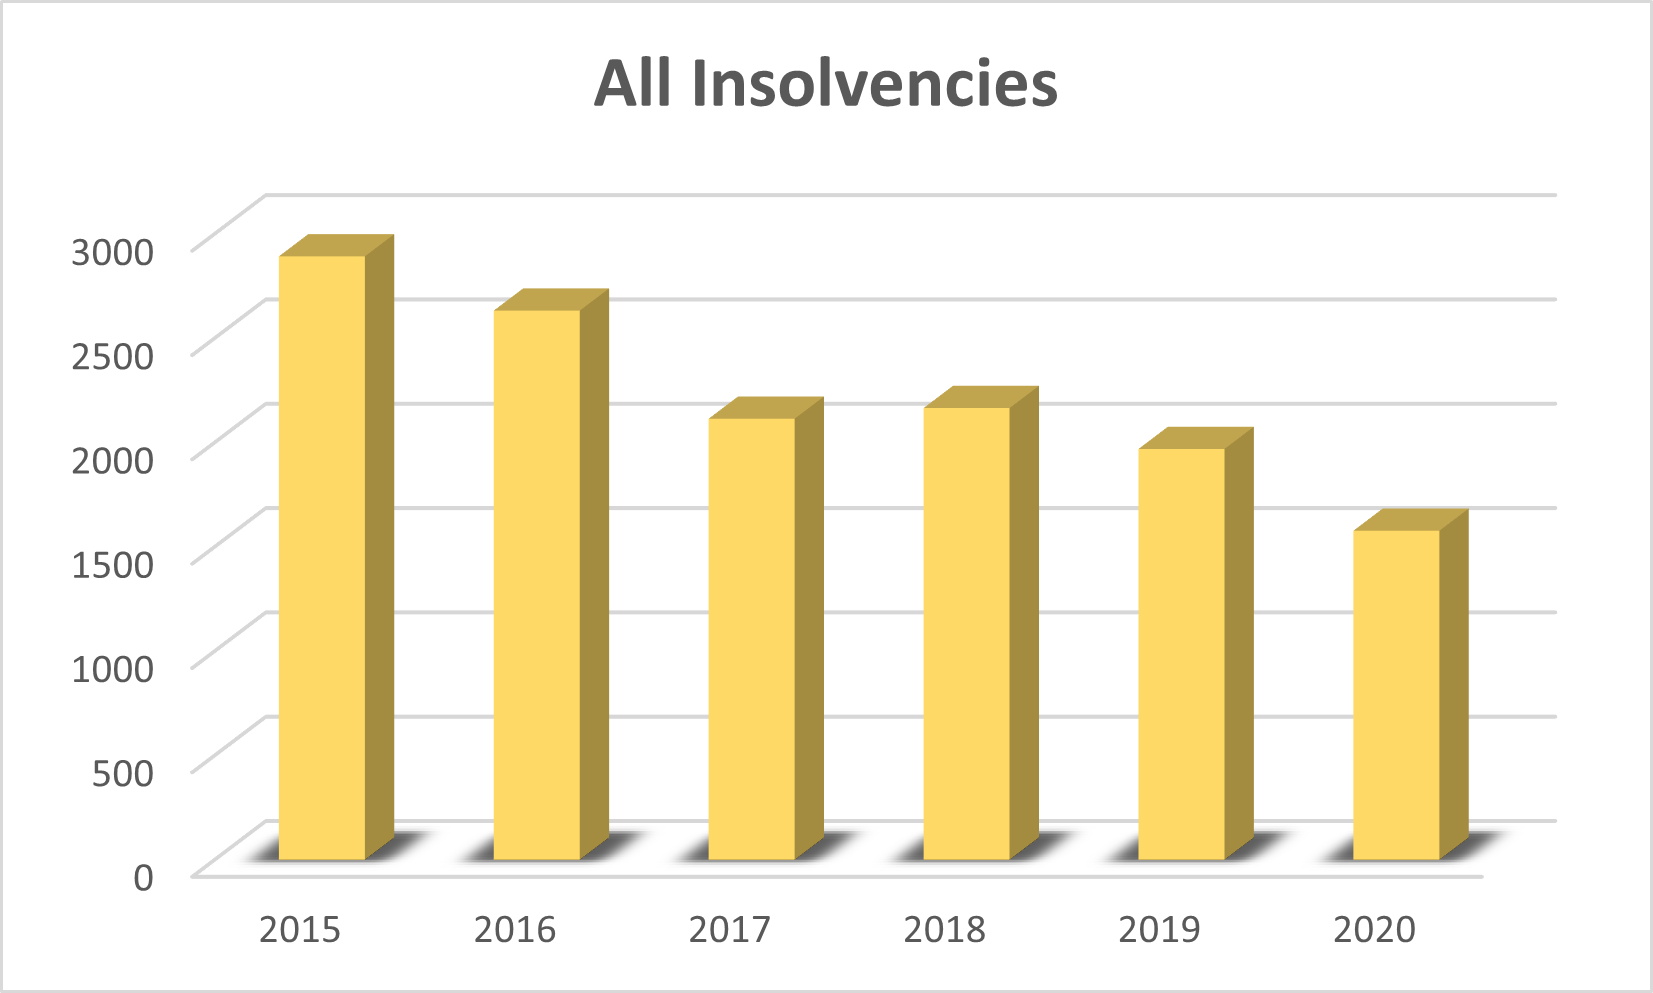 Bar graph of all insolvencies, with 2700 in 2015, and 1500 in 2020